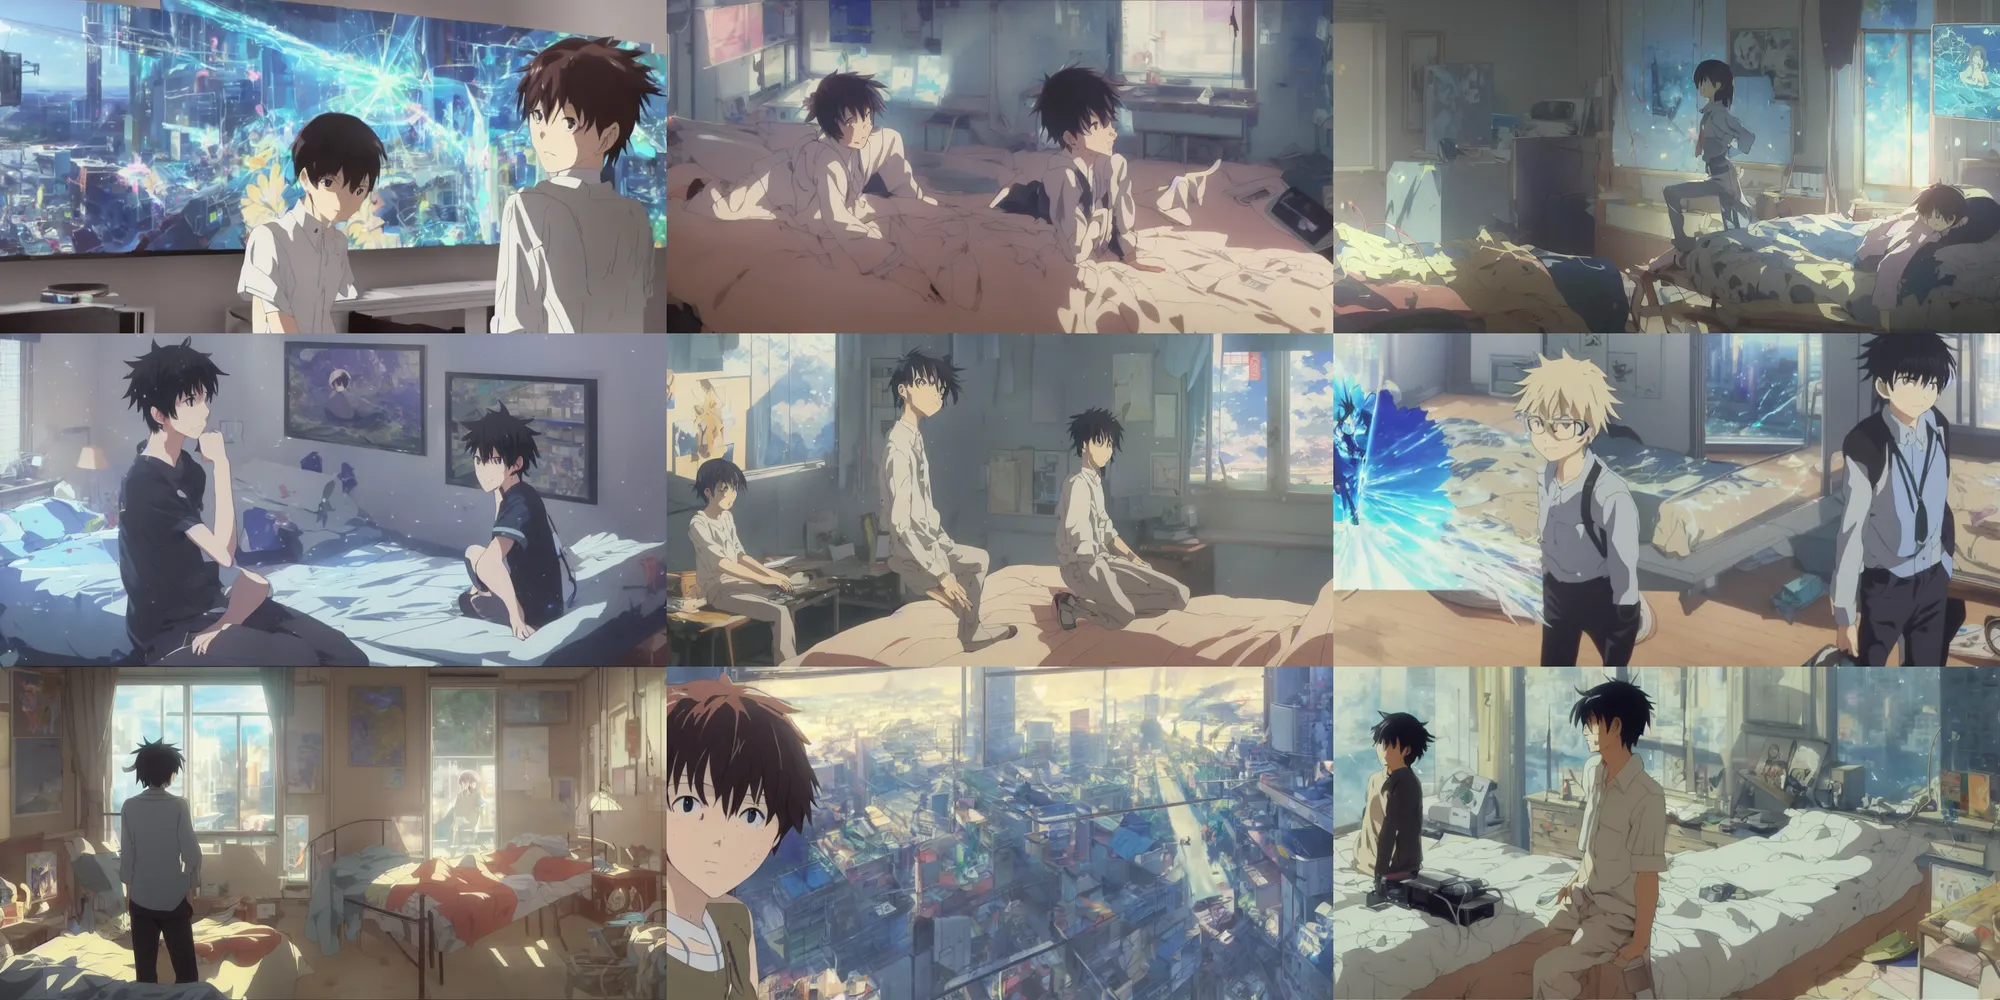 Prompt: screenshot from the anime film by Makoto Shinkai, adult male gamer alone in messy bedroom, painting of near future technological world, magical realism, looking through the prism at the digital world, screenshot from the Kyoto Animation anime about the boy who wears nervegear, makoto shinkai, augmented reality, real life blended with digital world